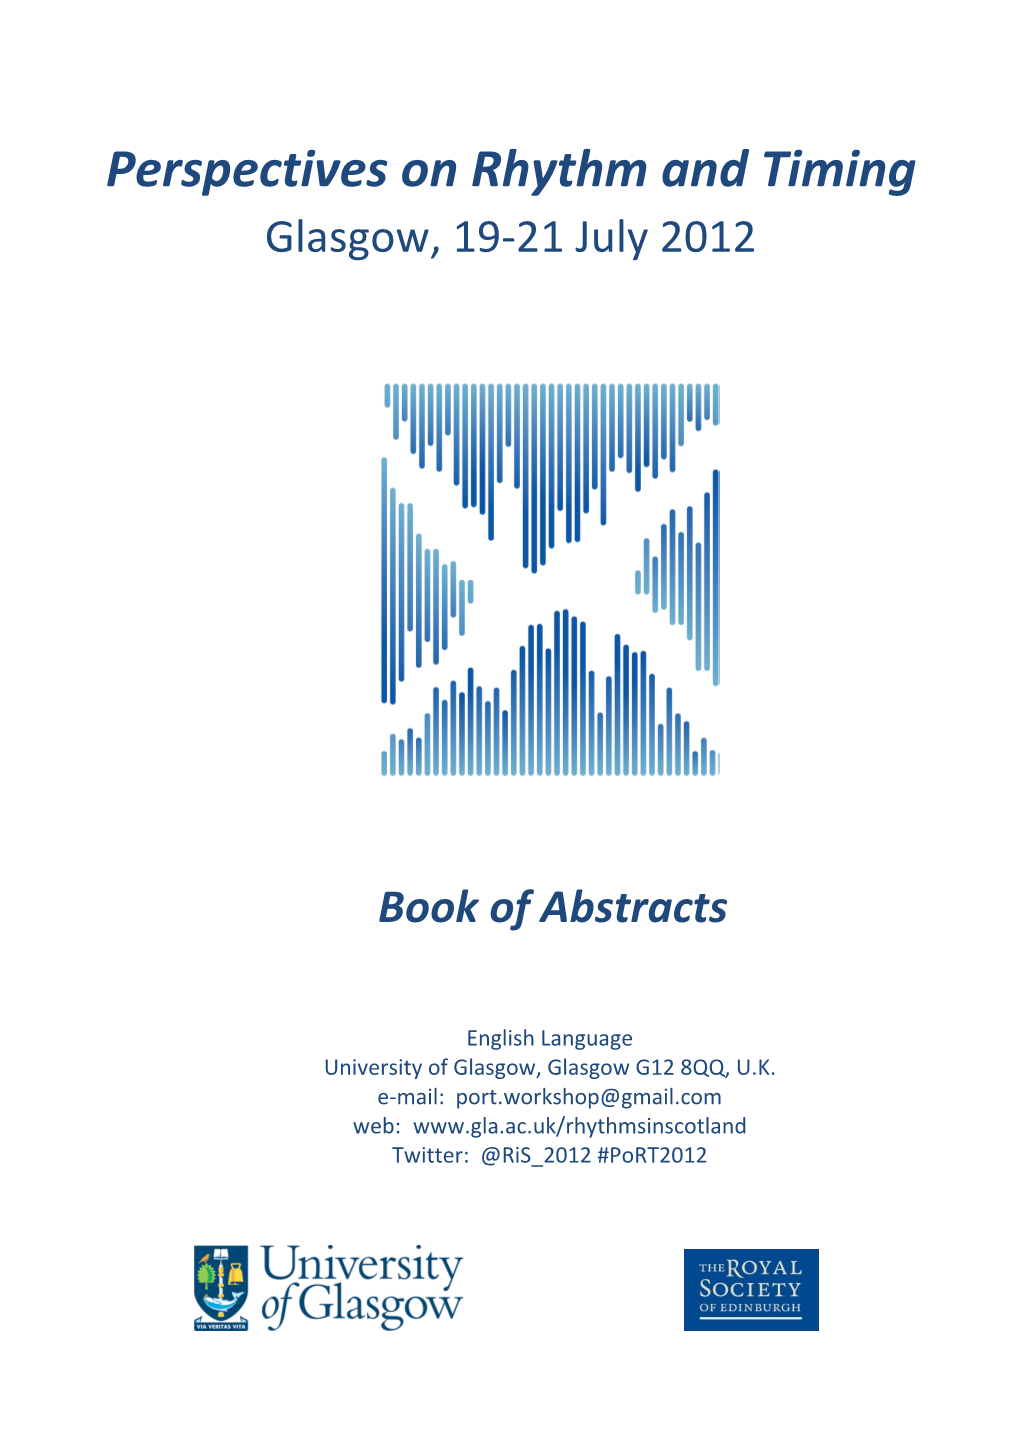 Perspectives on Rhythm and Timing Glasgow, 19-21 July 2012